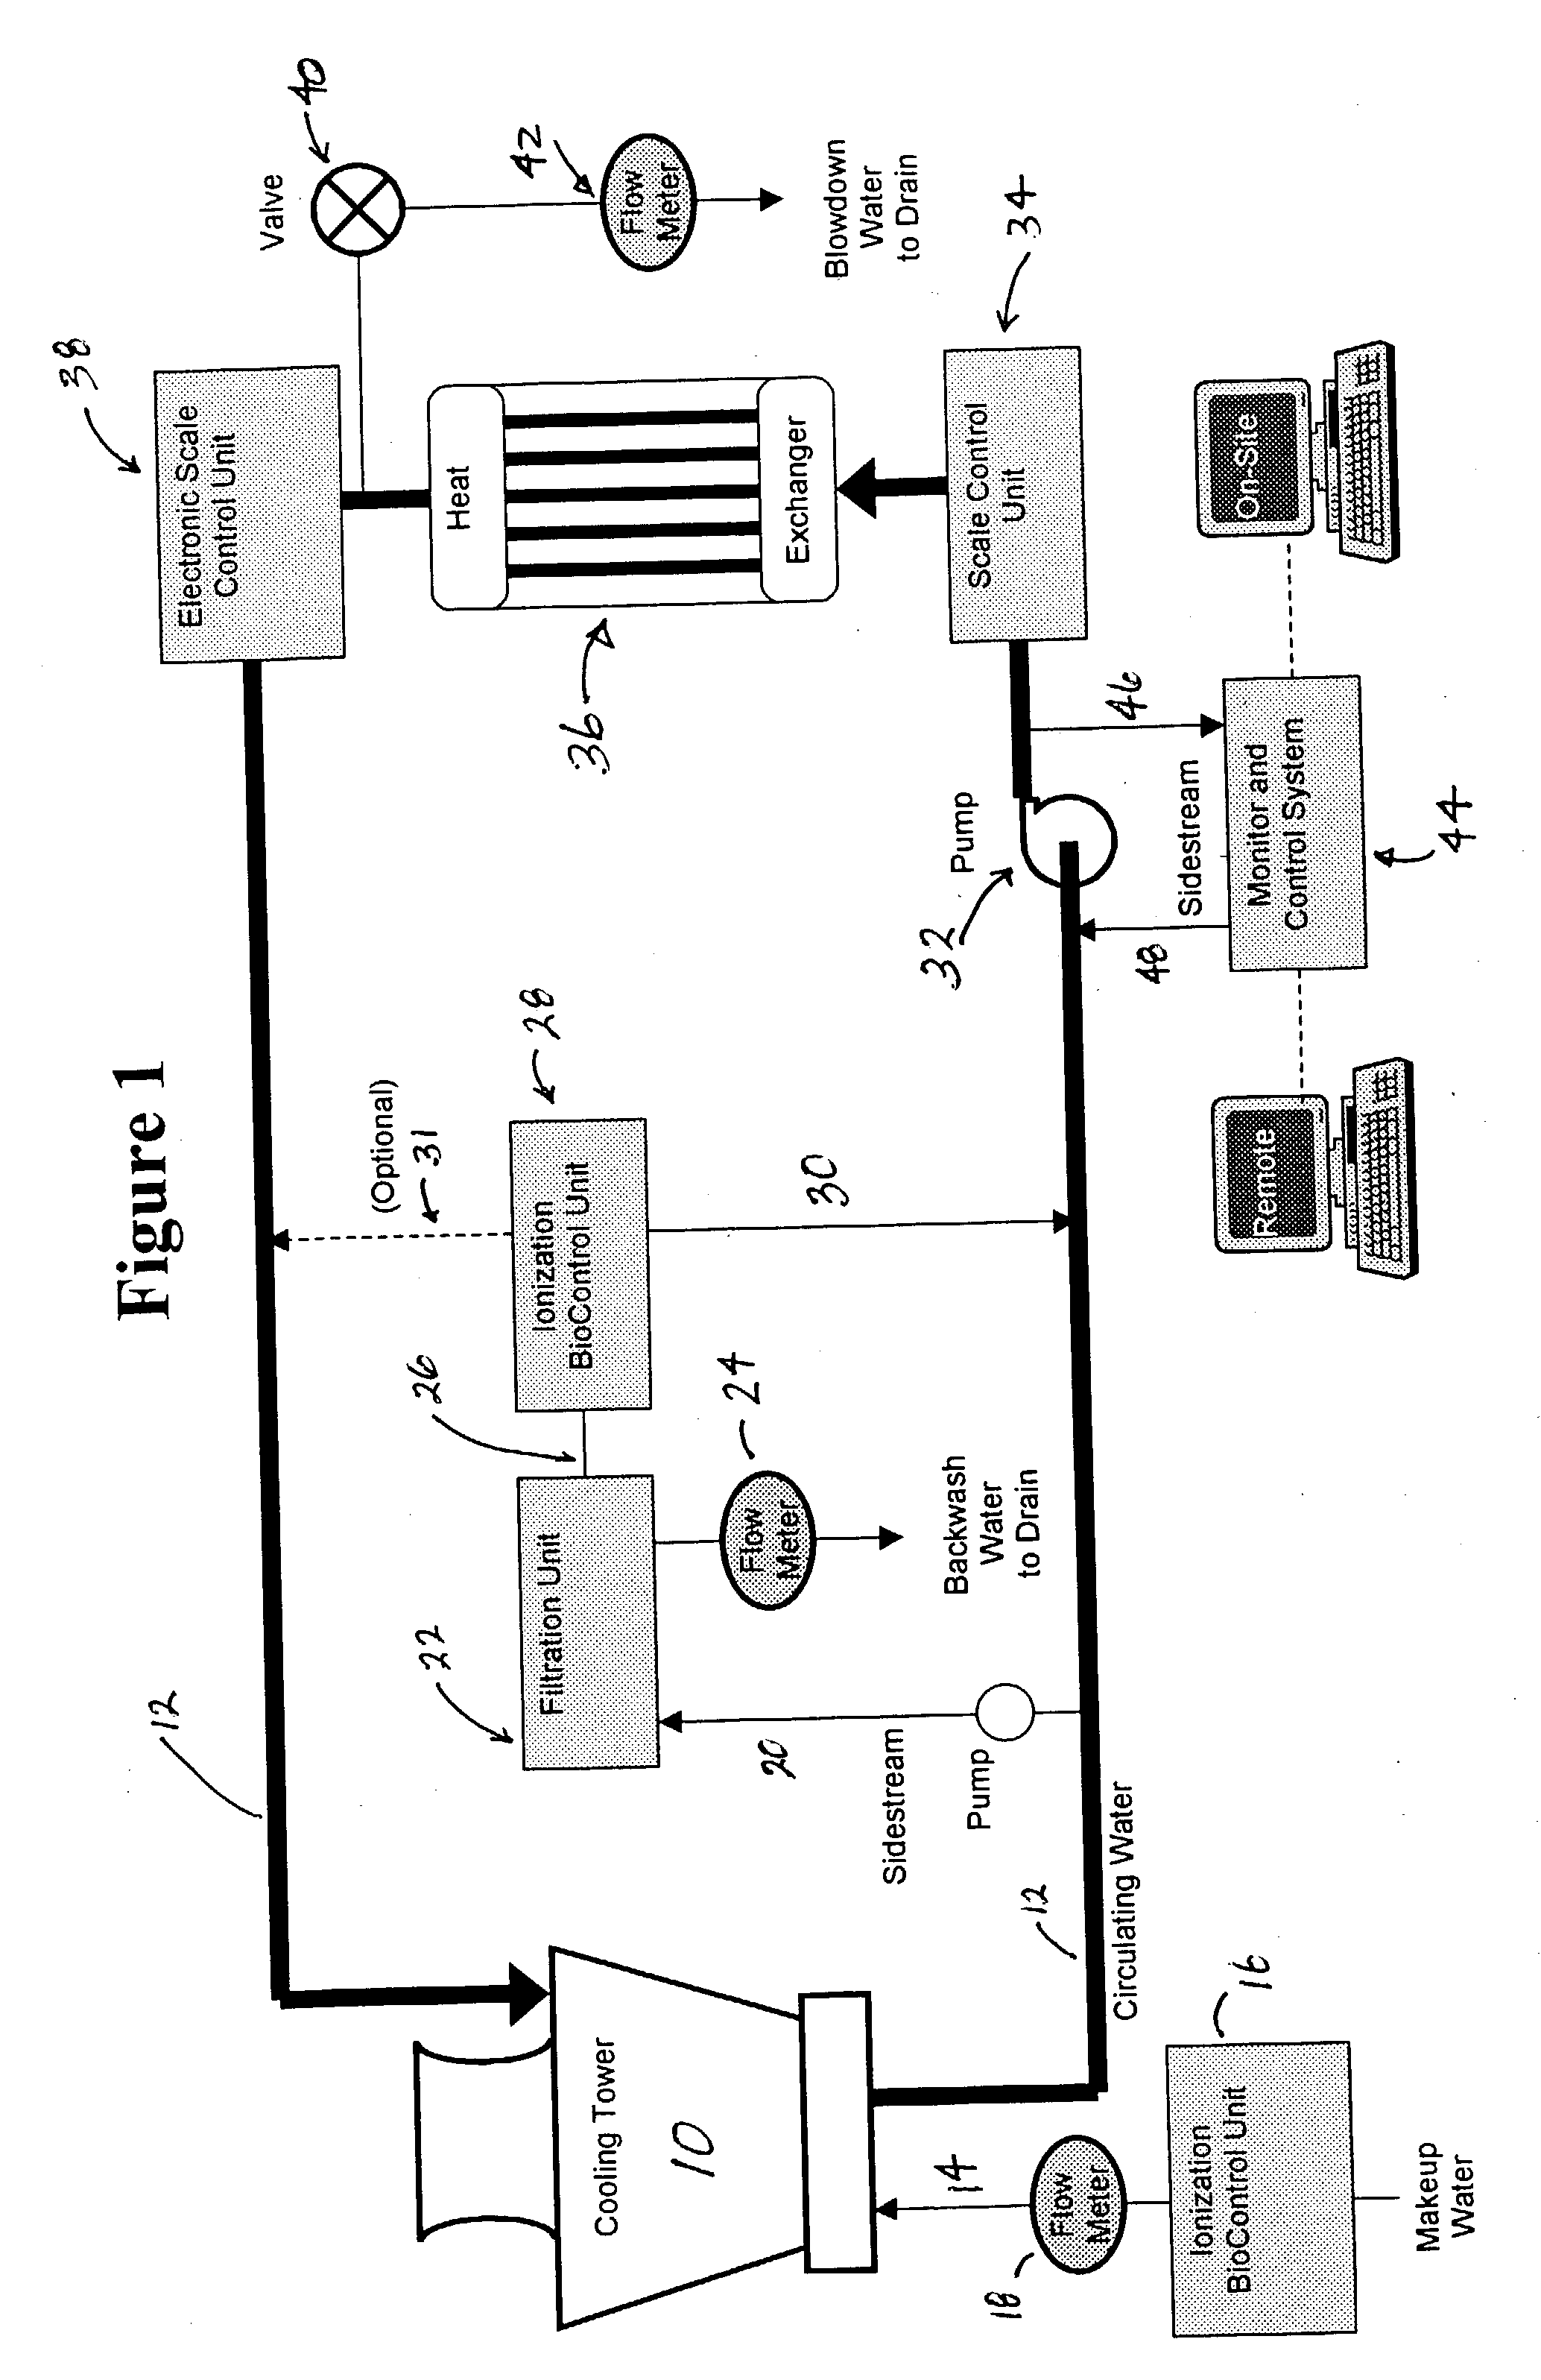 Apparatus, system and method for non-chemical treatment and management of cooling water